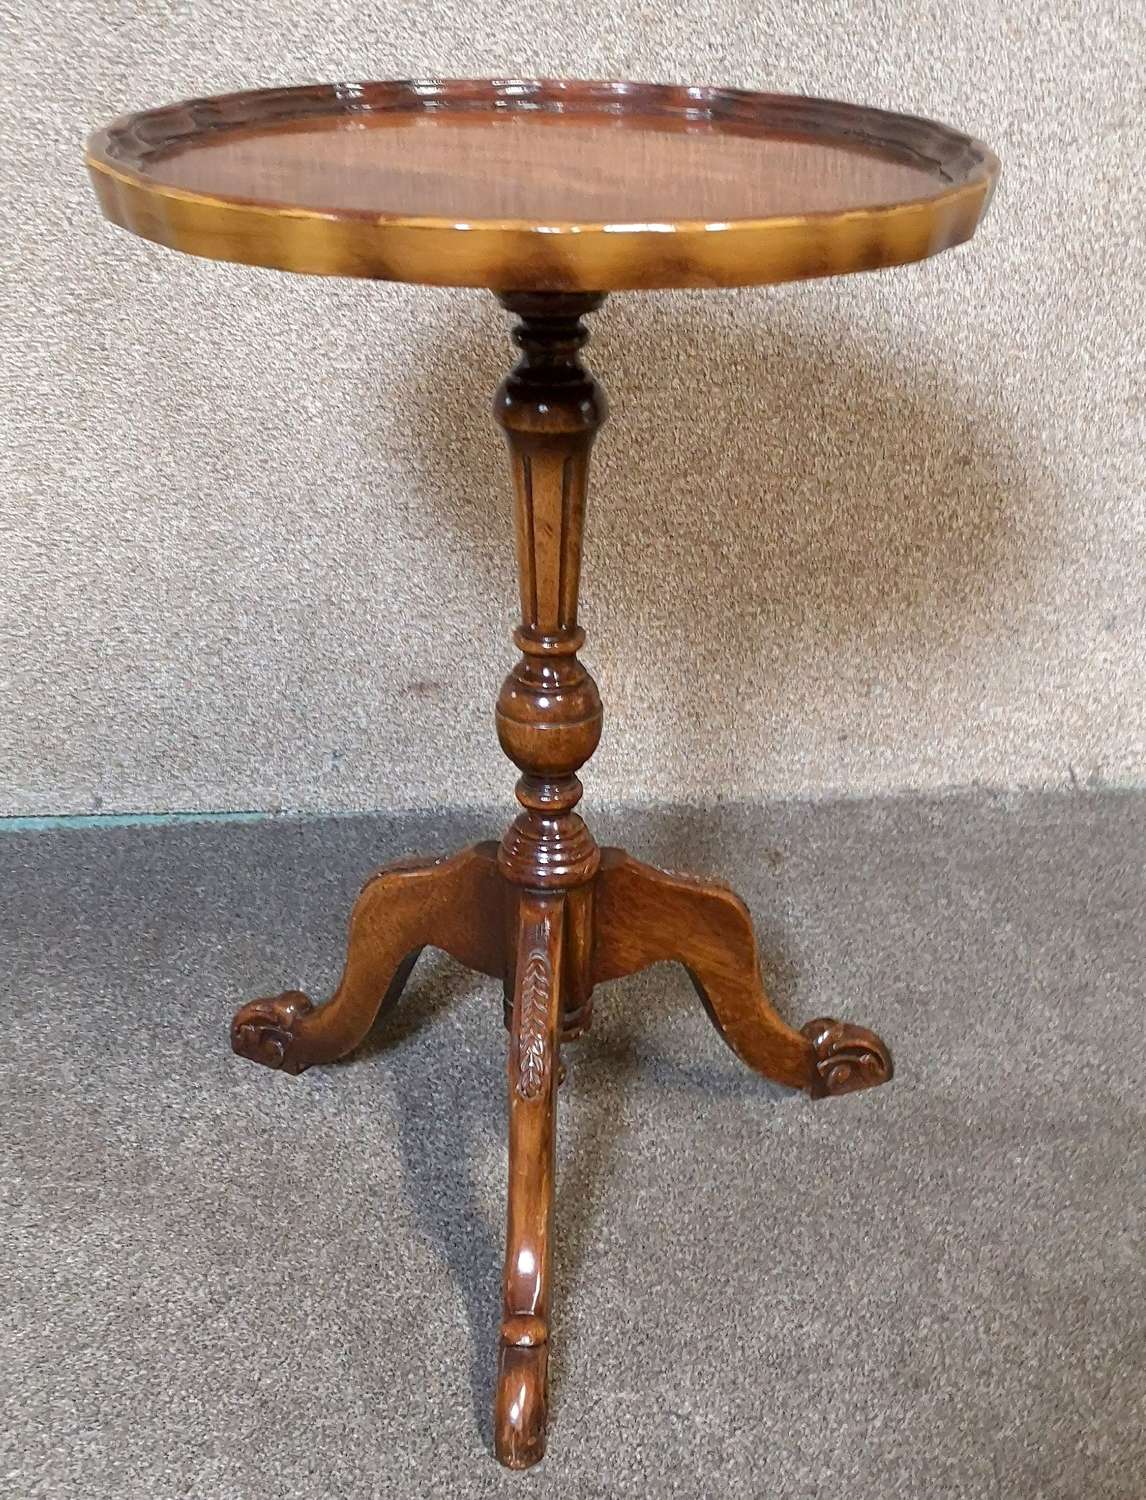 Reprodux Bevan Funnell Figured Mahogany Wine Table